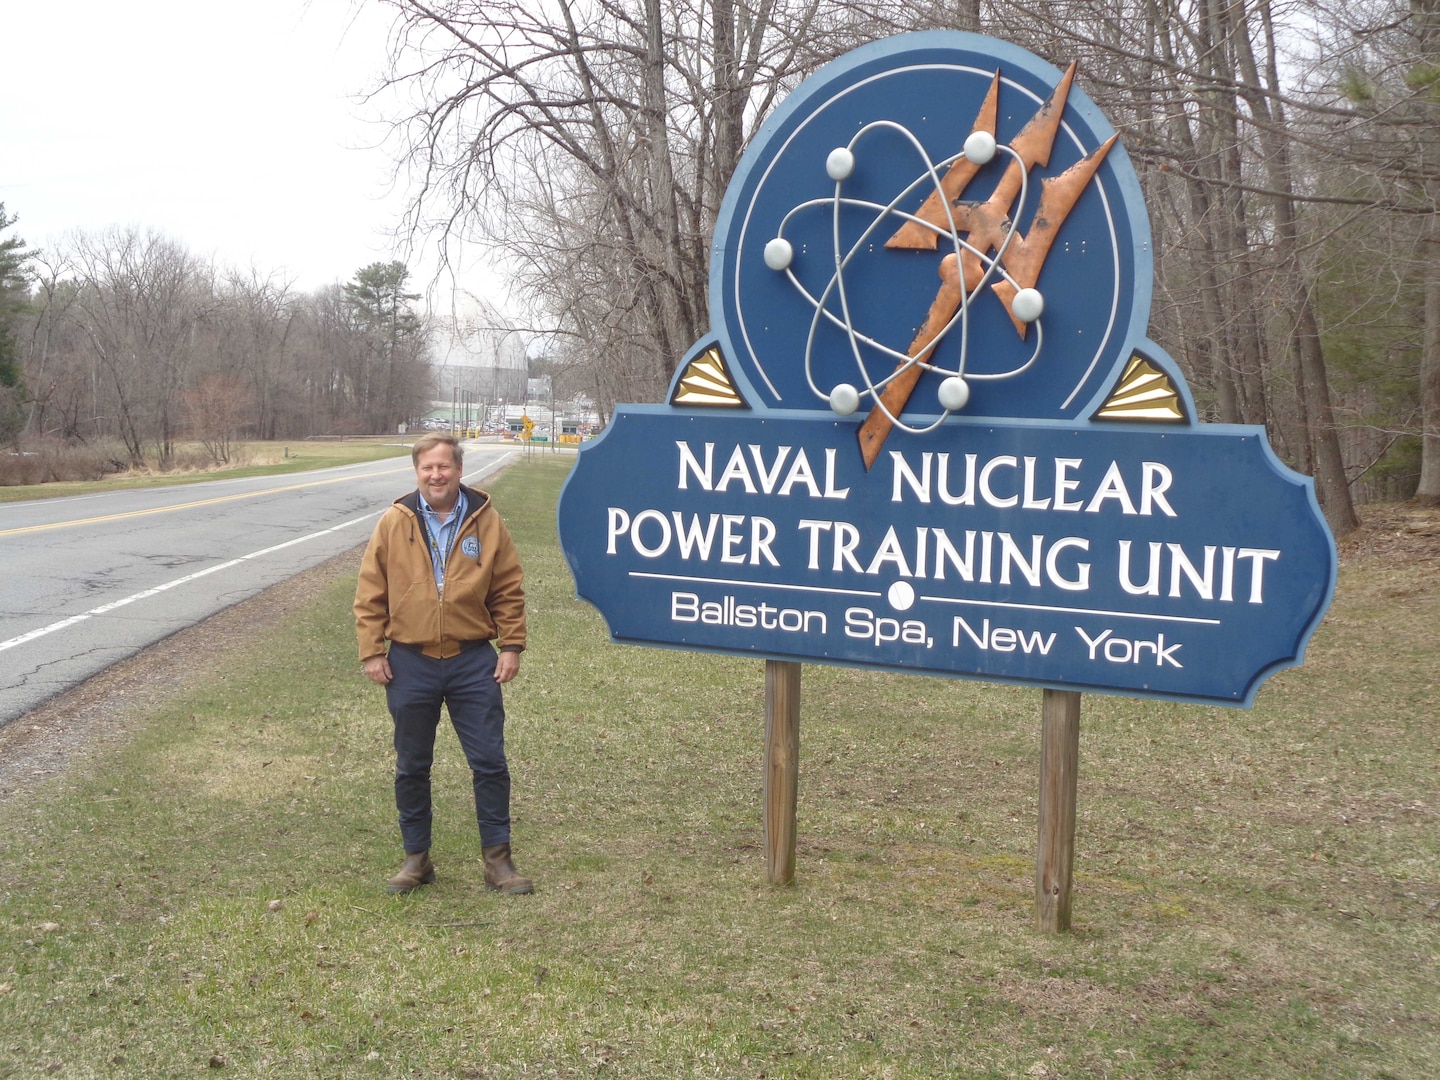 Kesselring Site Advanced Planning Group Project Superintendent Brian Fowler at the Naval Nuclear Power Training Unit sign in Ballston Spa, New York.